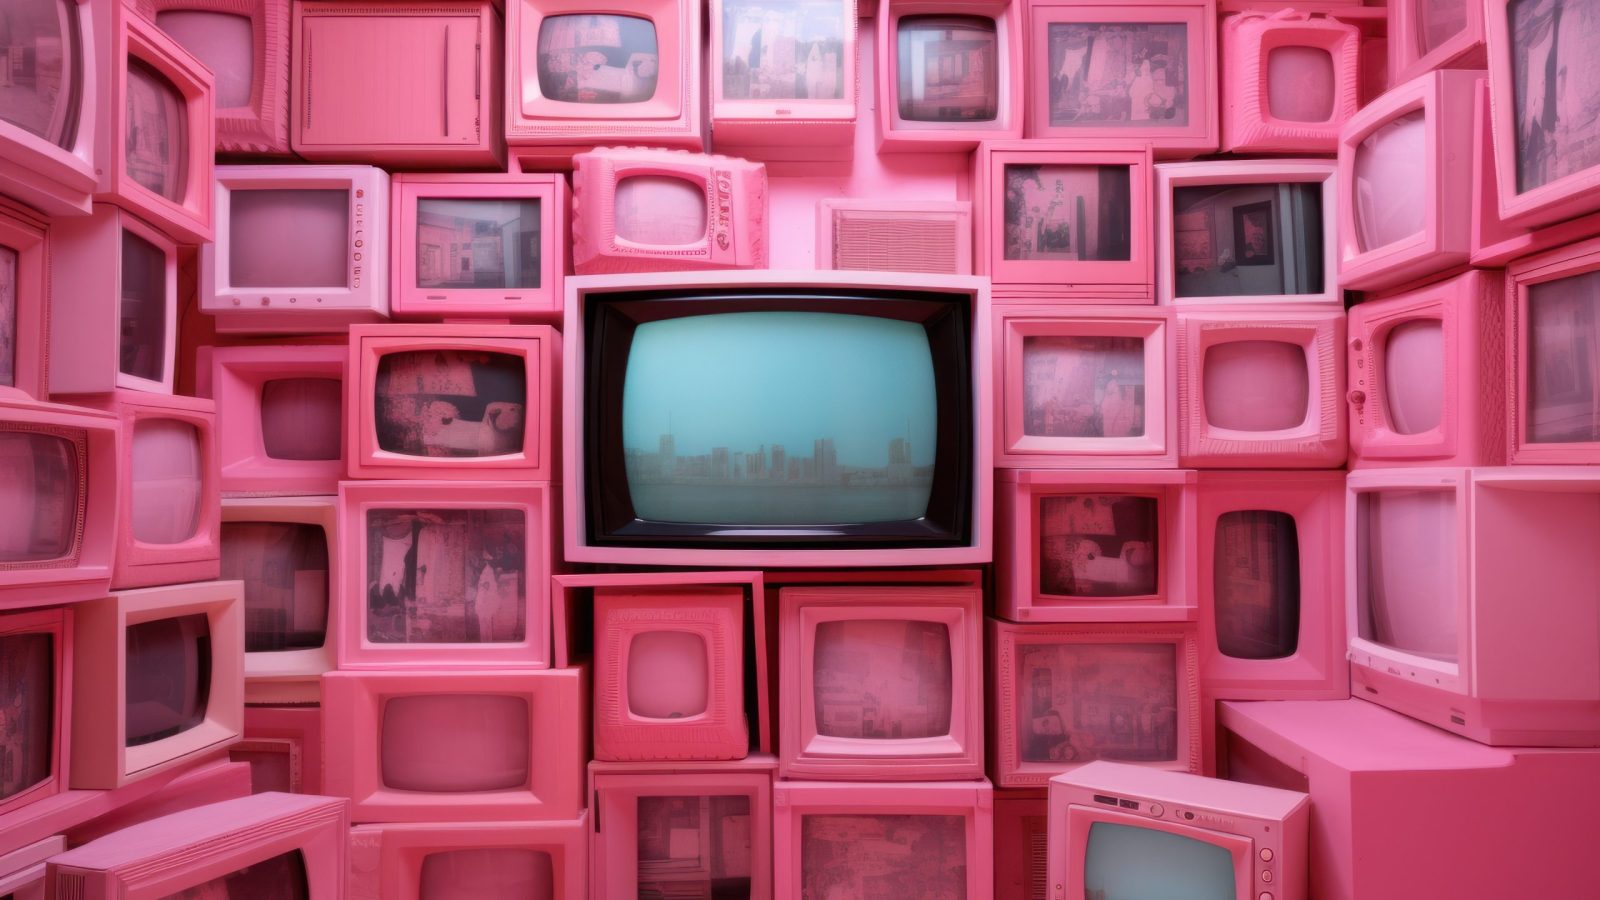 A striking array of pink vintage televisions with a prominent central tv showcasing a skyline